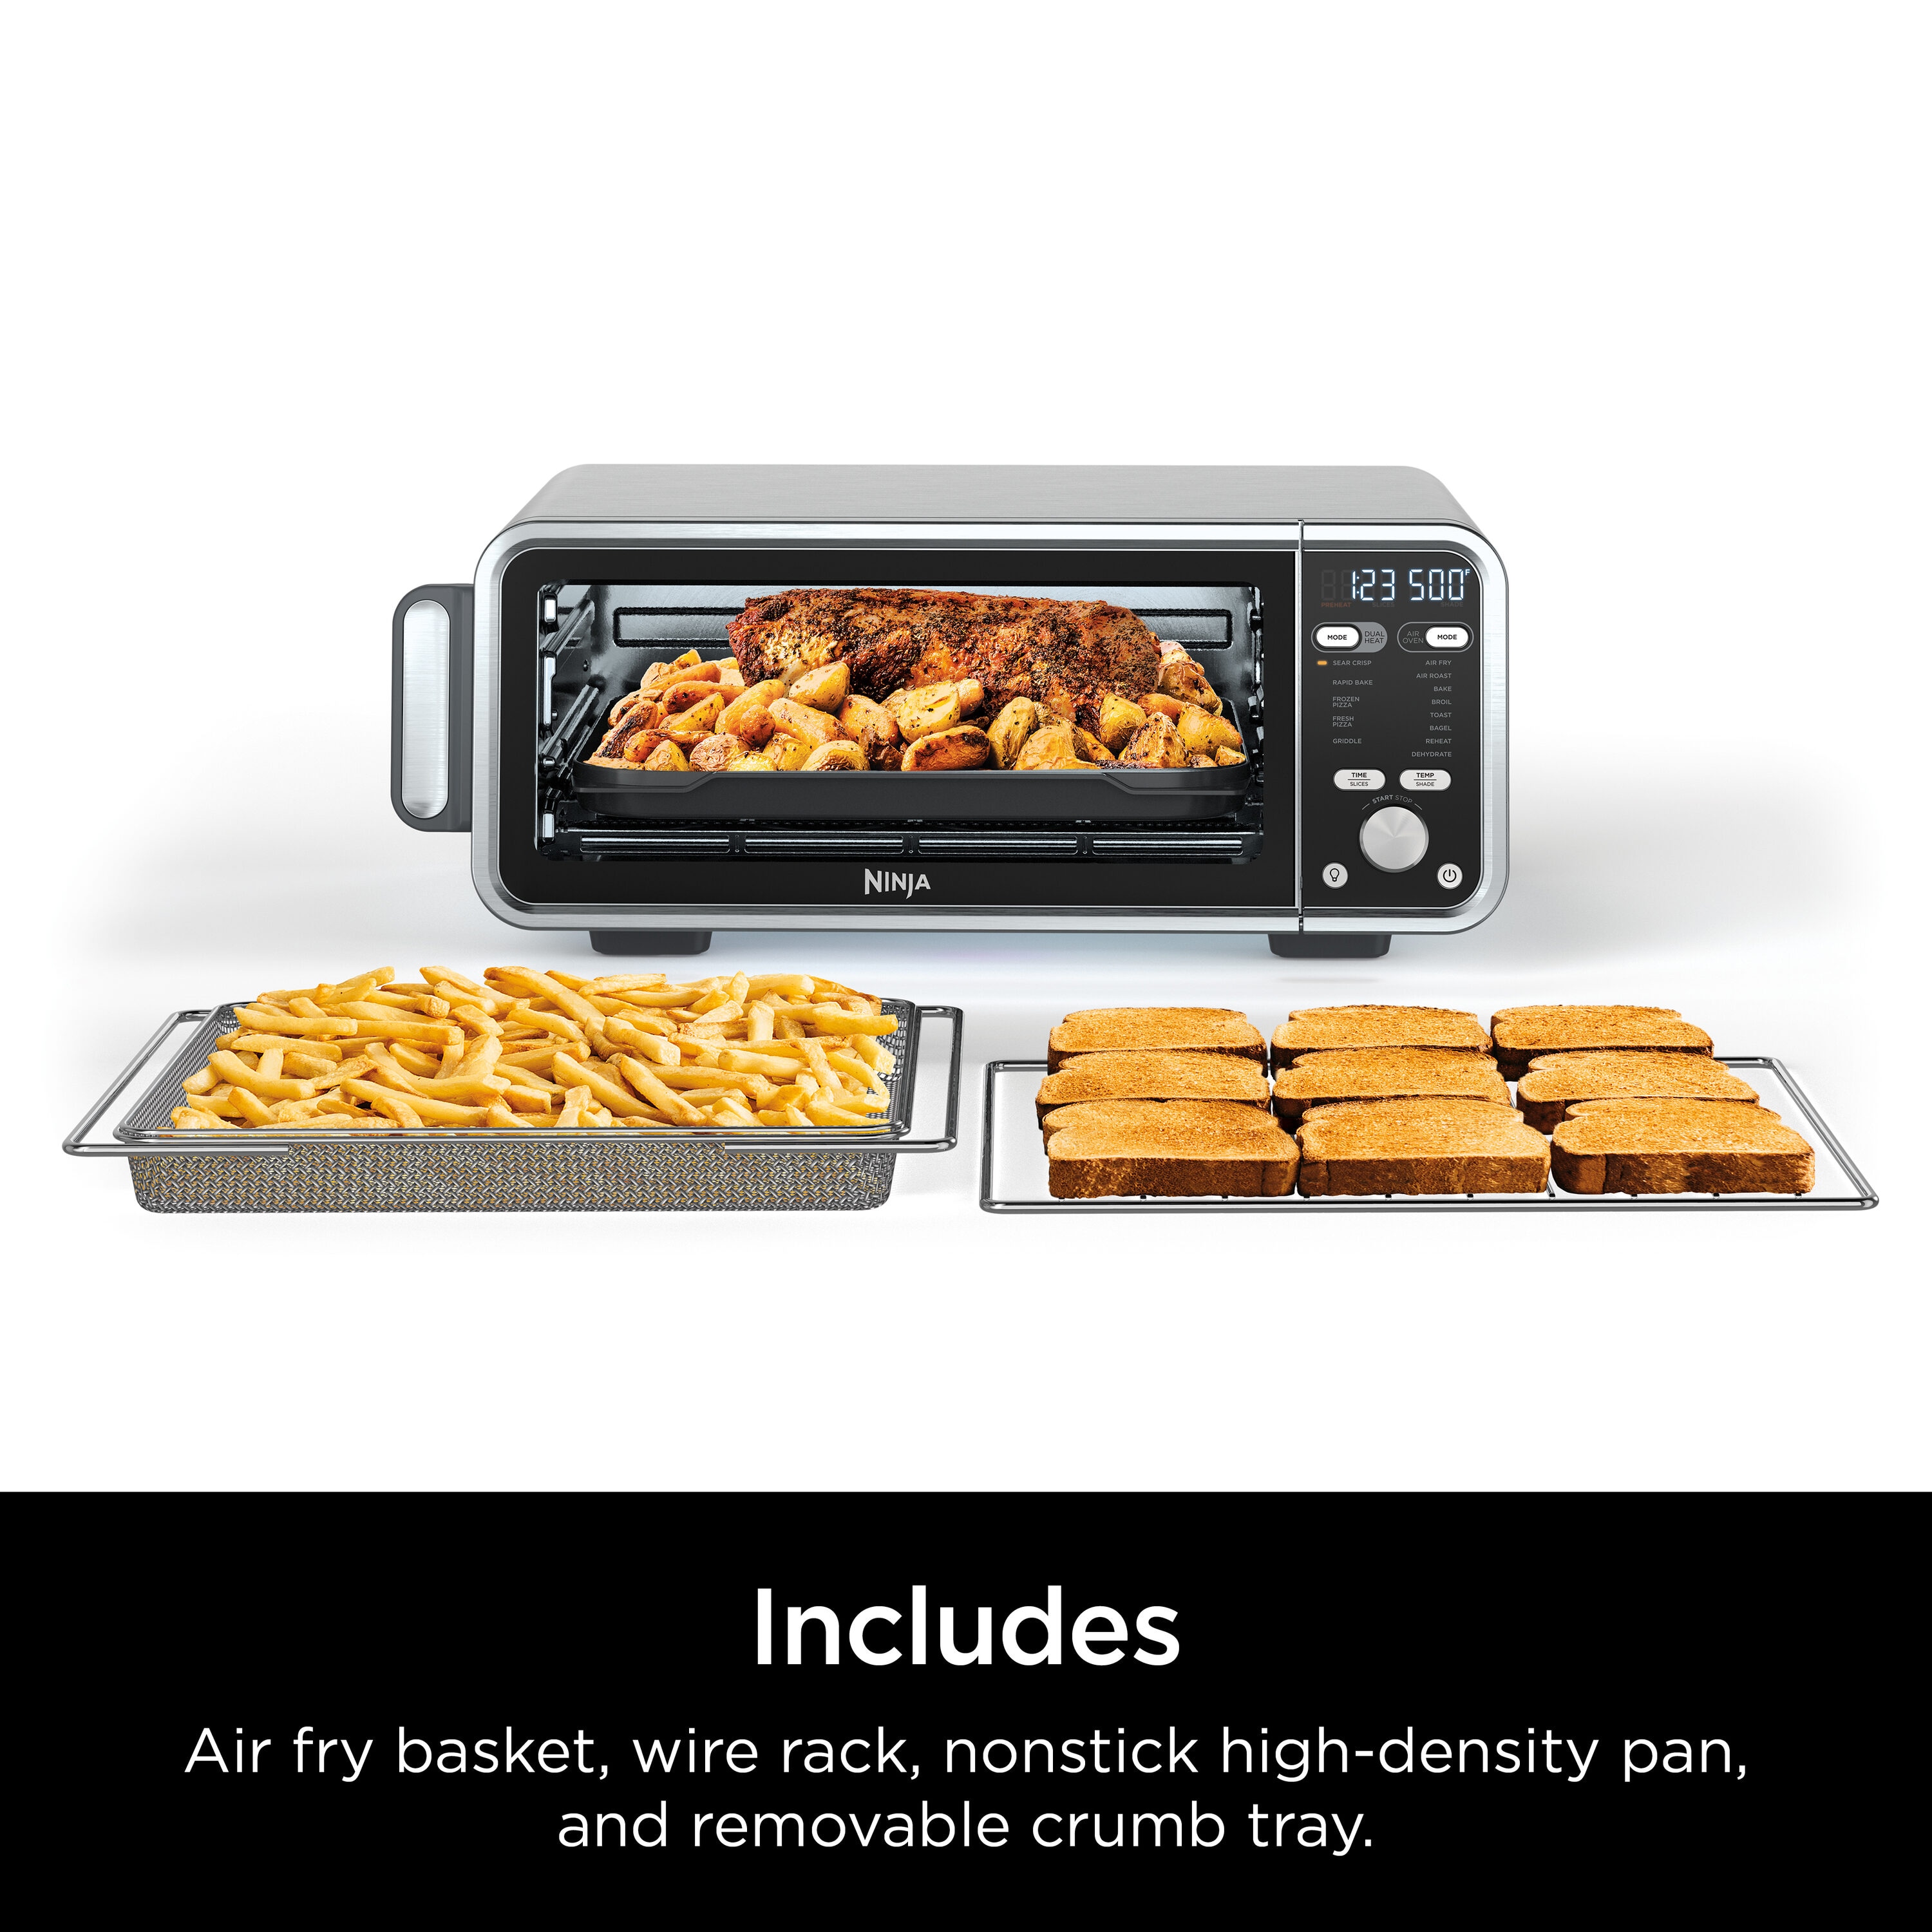 GE Stainless Steel Digital Air Fryer Toaster Oven with 8 Cooking